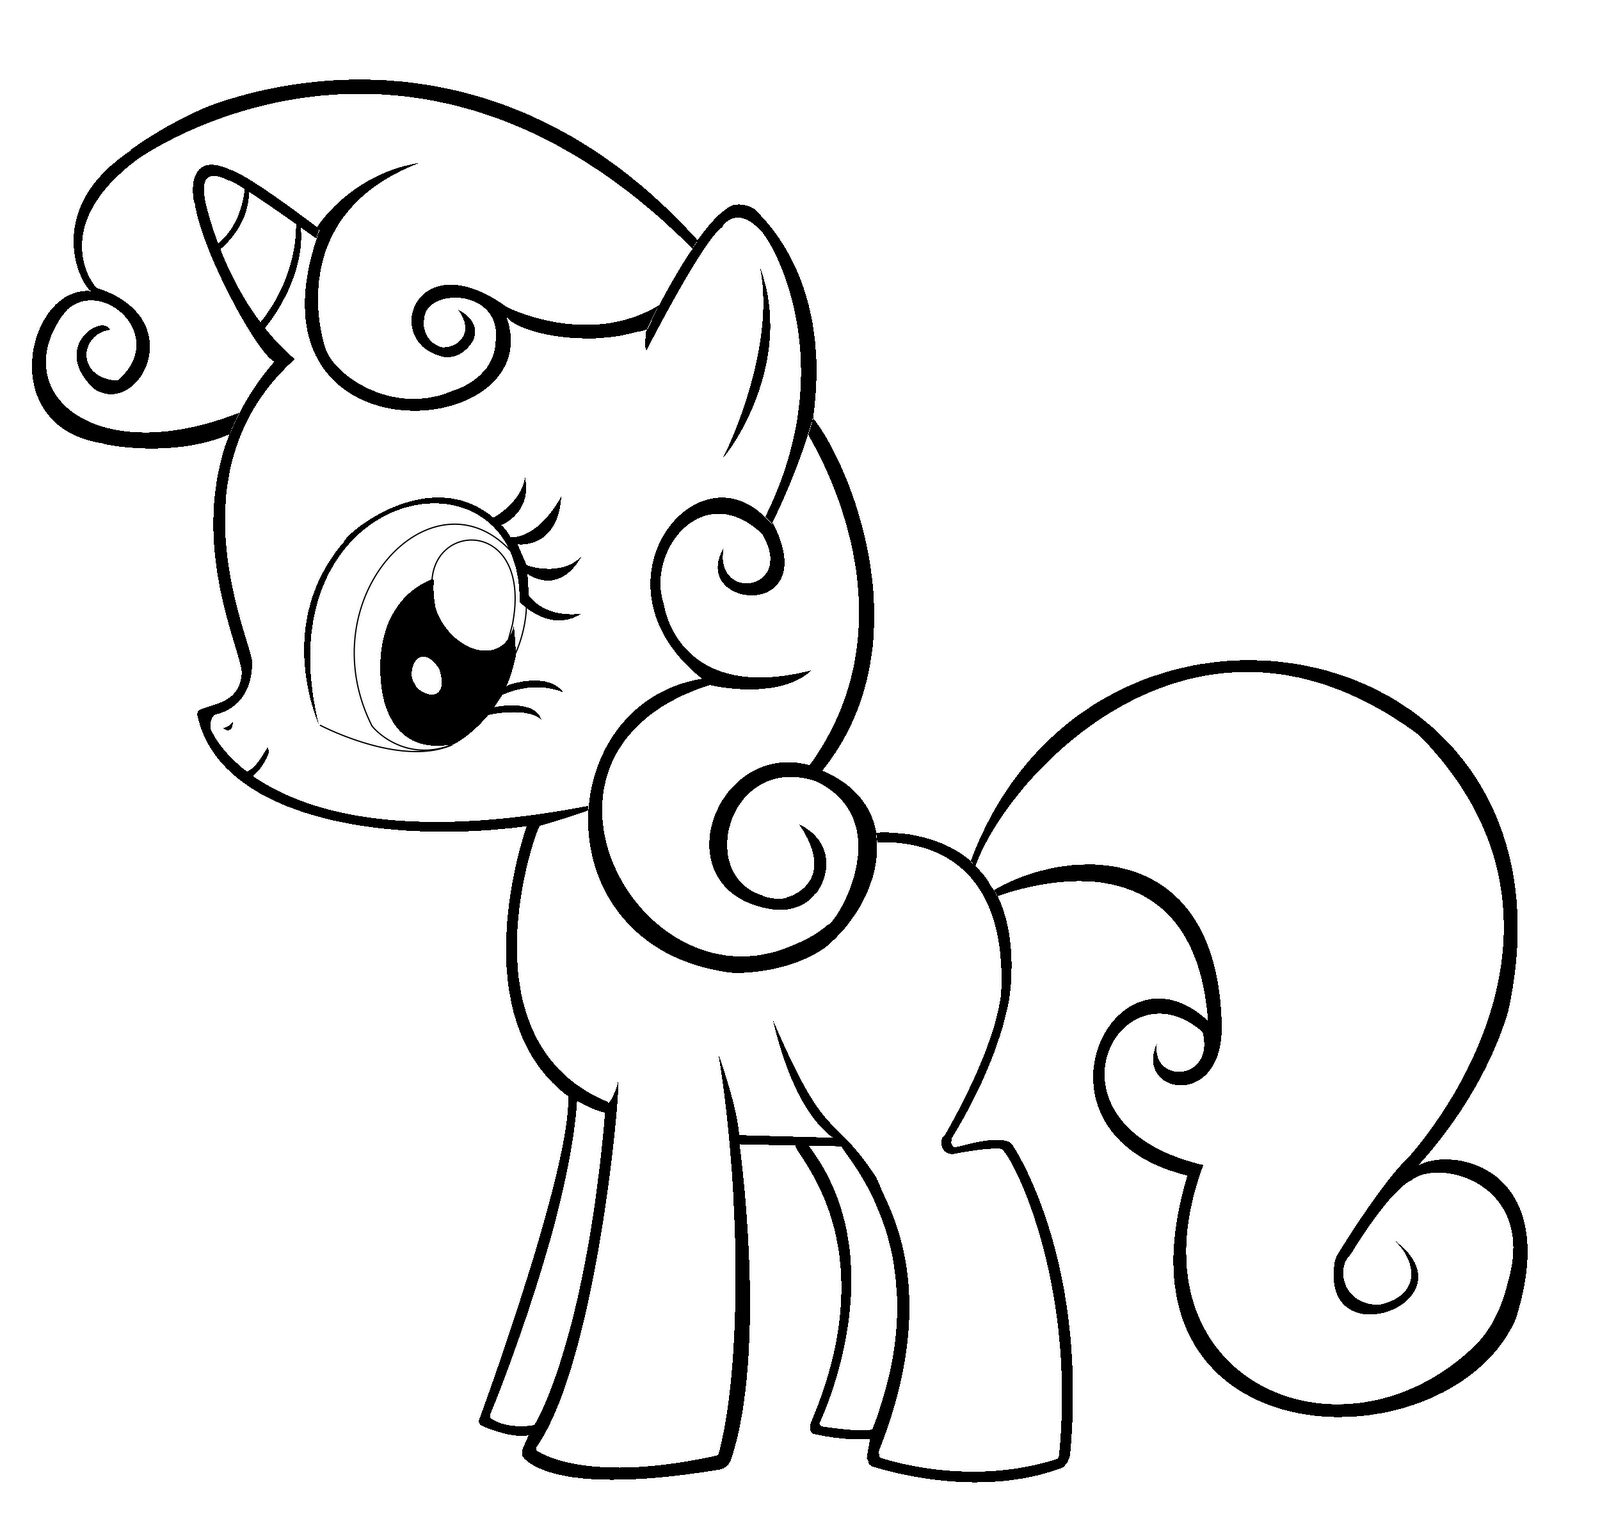 Download Free Printable My Little Pony Coloring Pages For Kids